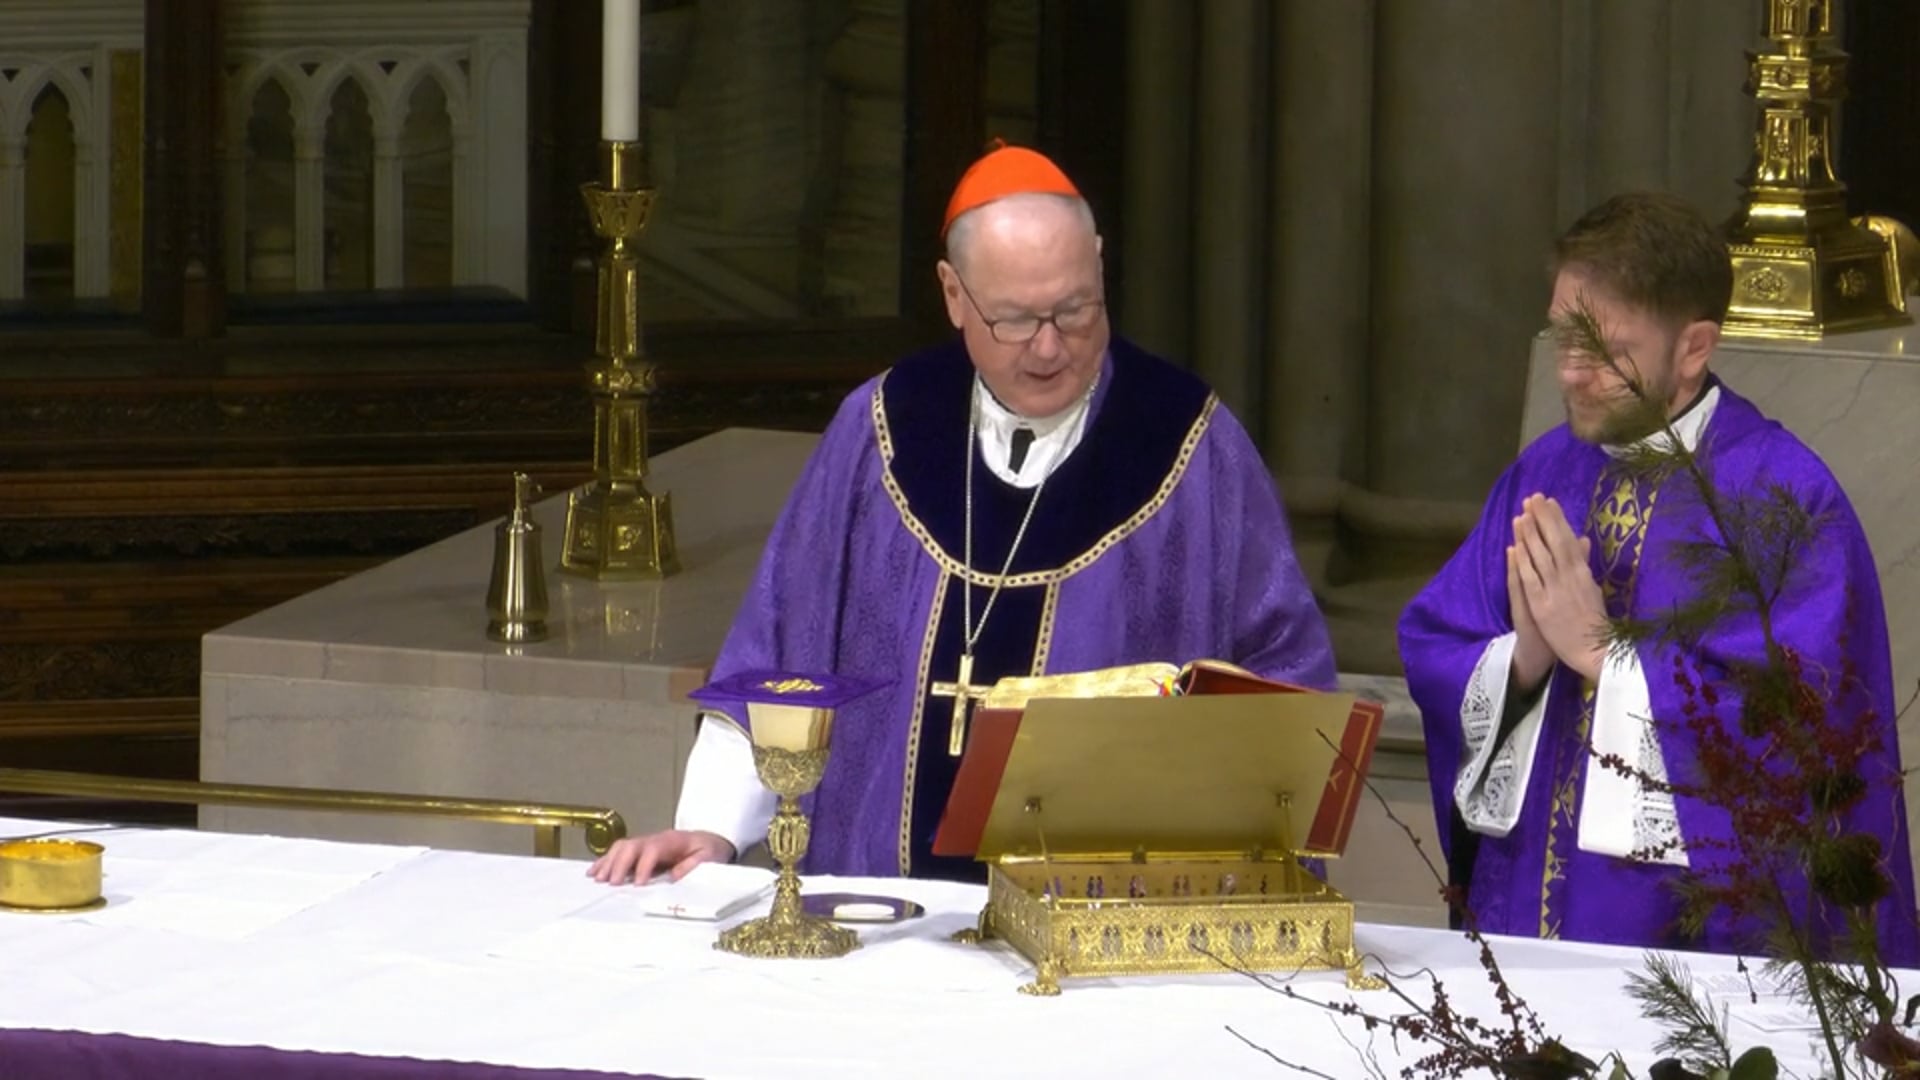 Mass from St. Patrick's Cathedral - November 28, 2022